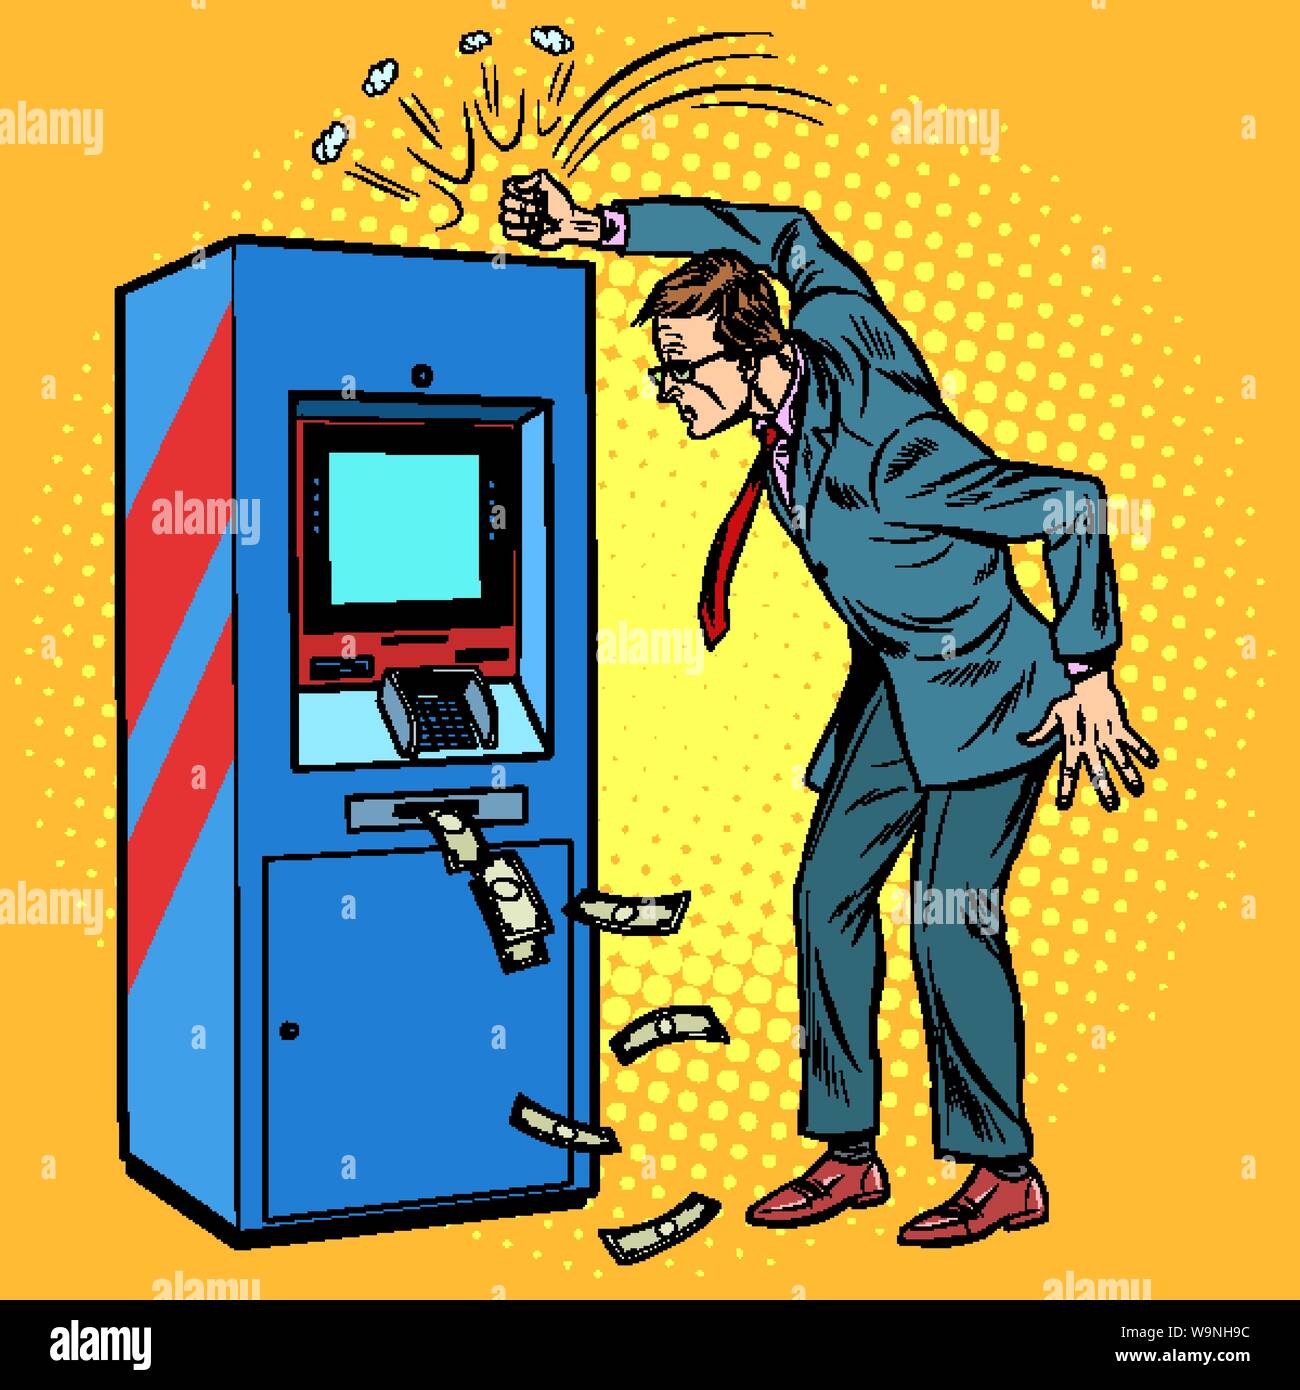 the damaged ATM and the angry man Stock Vector